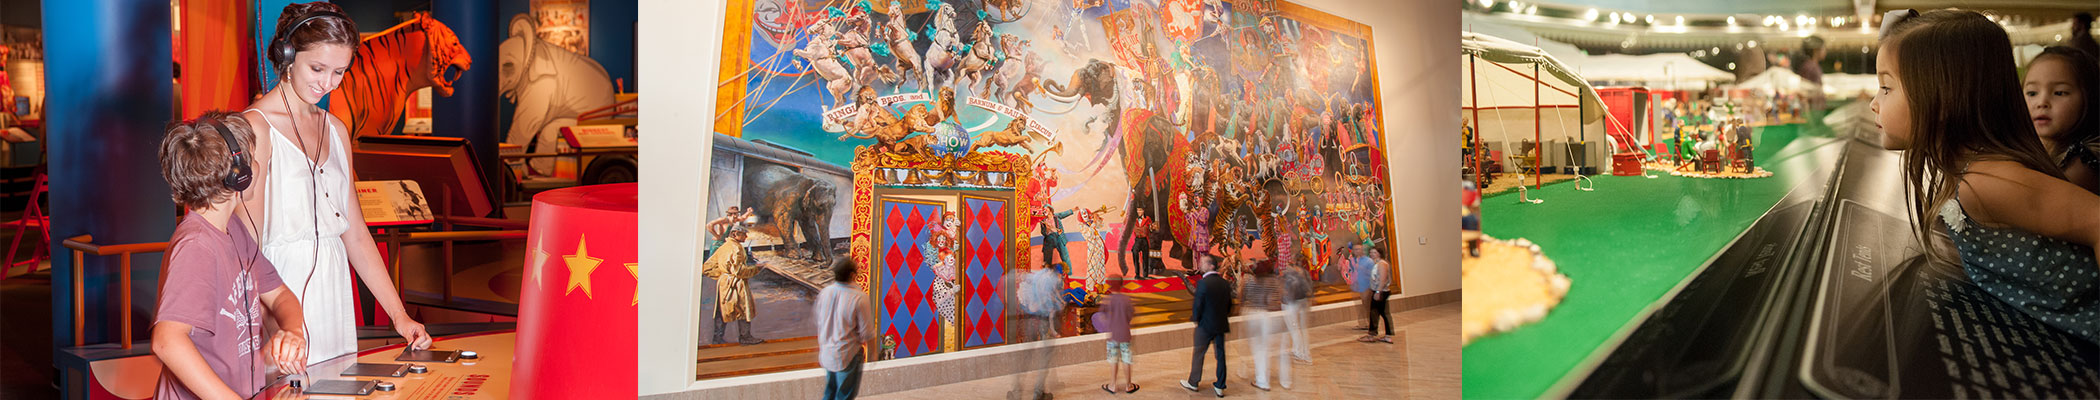 The Ringling Museum Banner Image